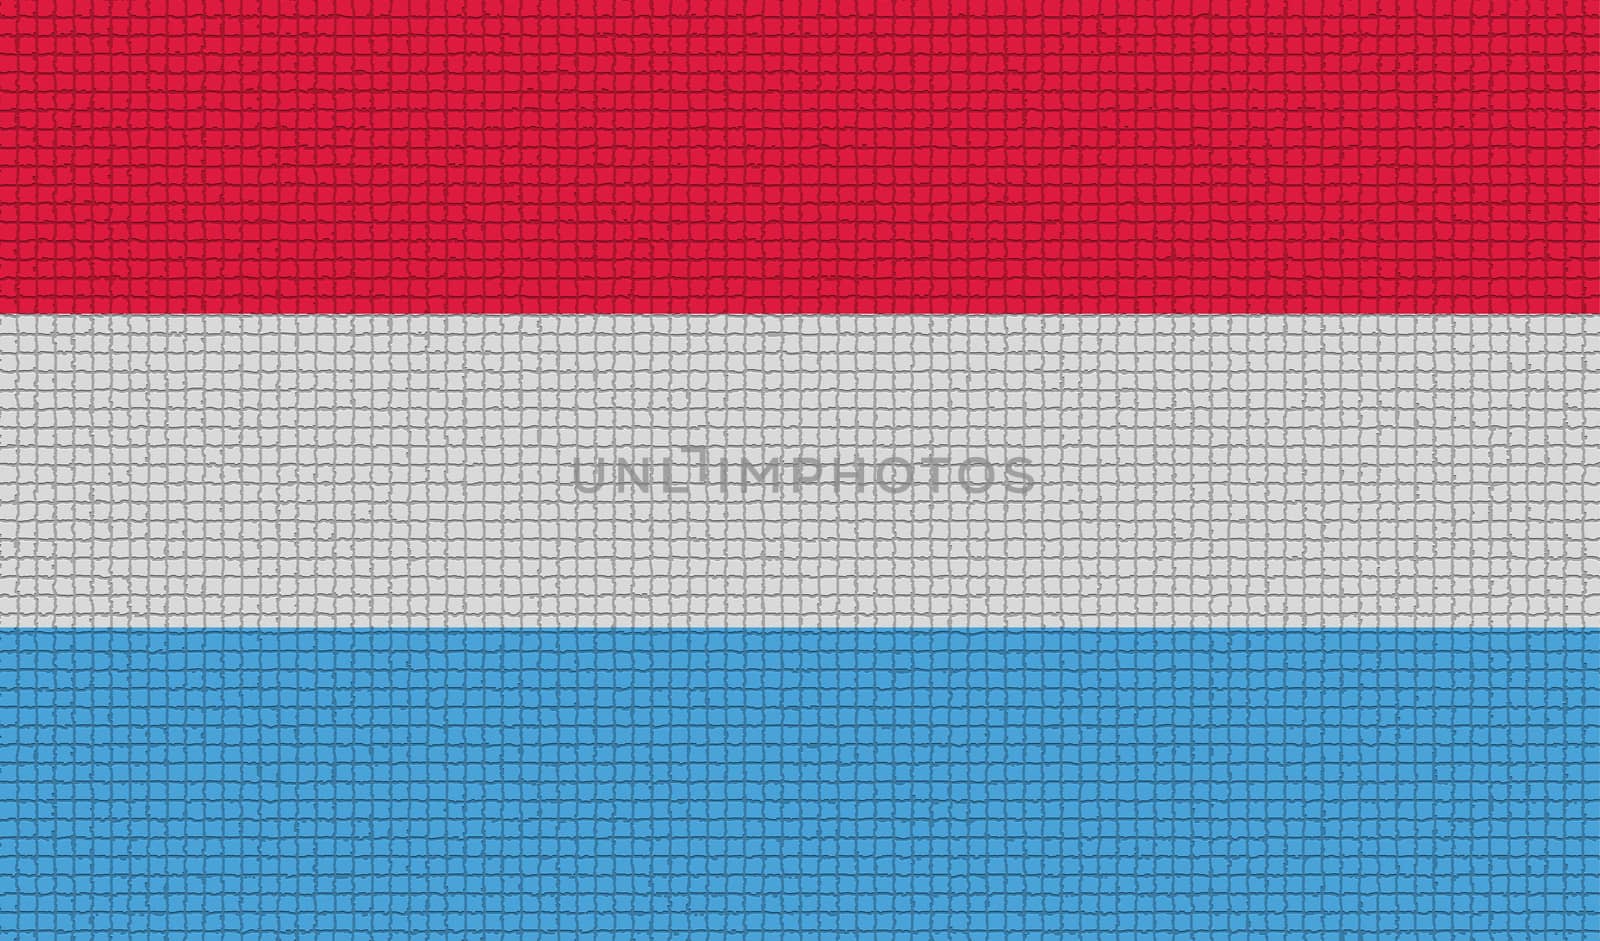 Flags of Luxembourg with abstract textures. Rasterized version